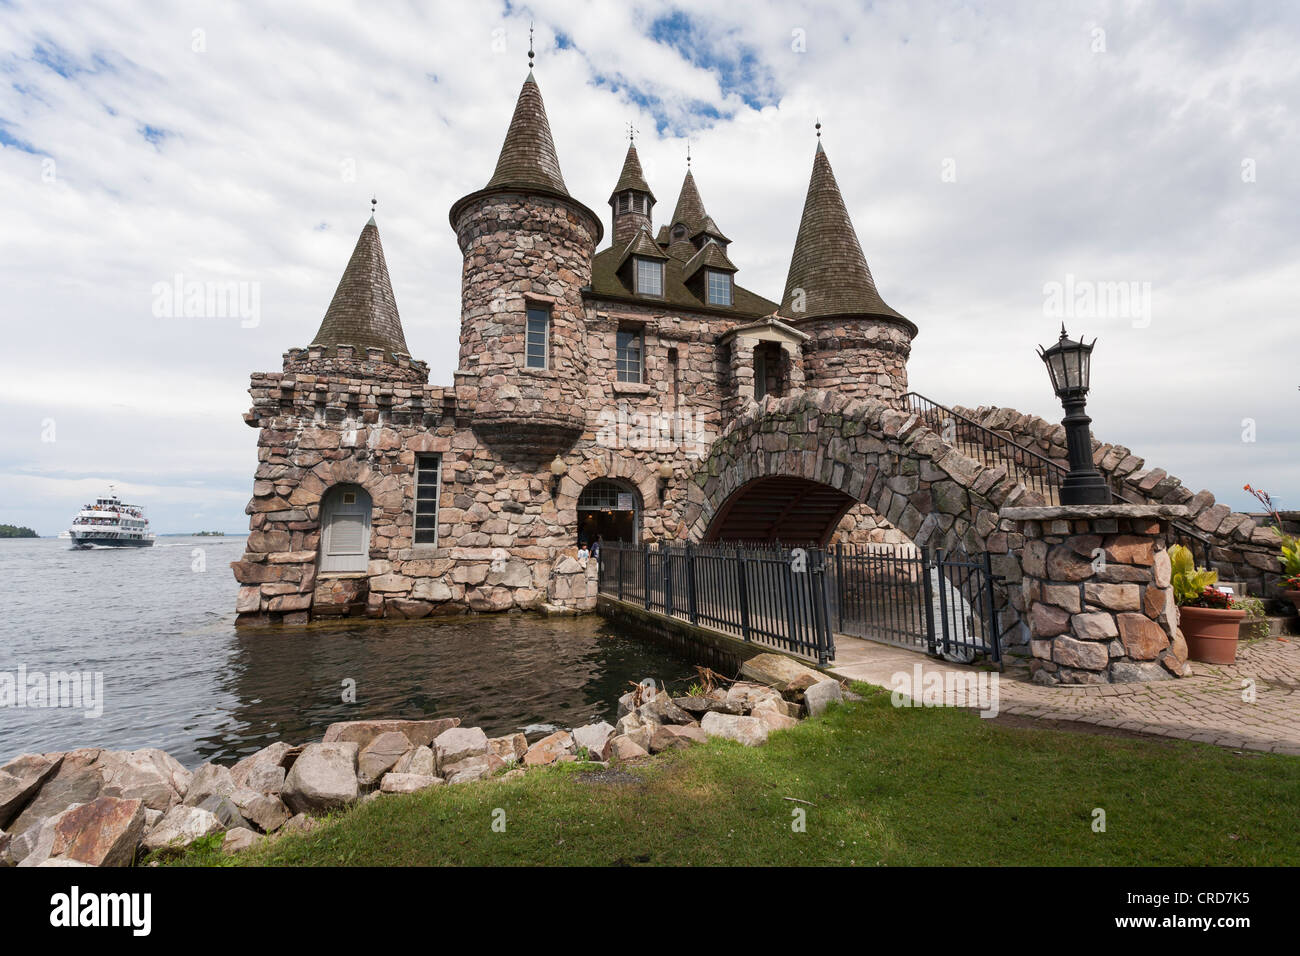 The Power House at Boldt Castle, tour boat approaching from the river. Stock Photo